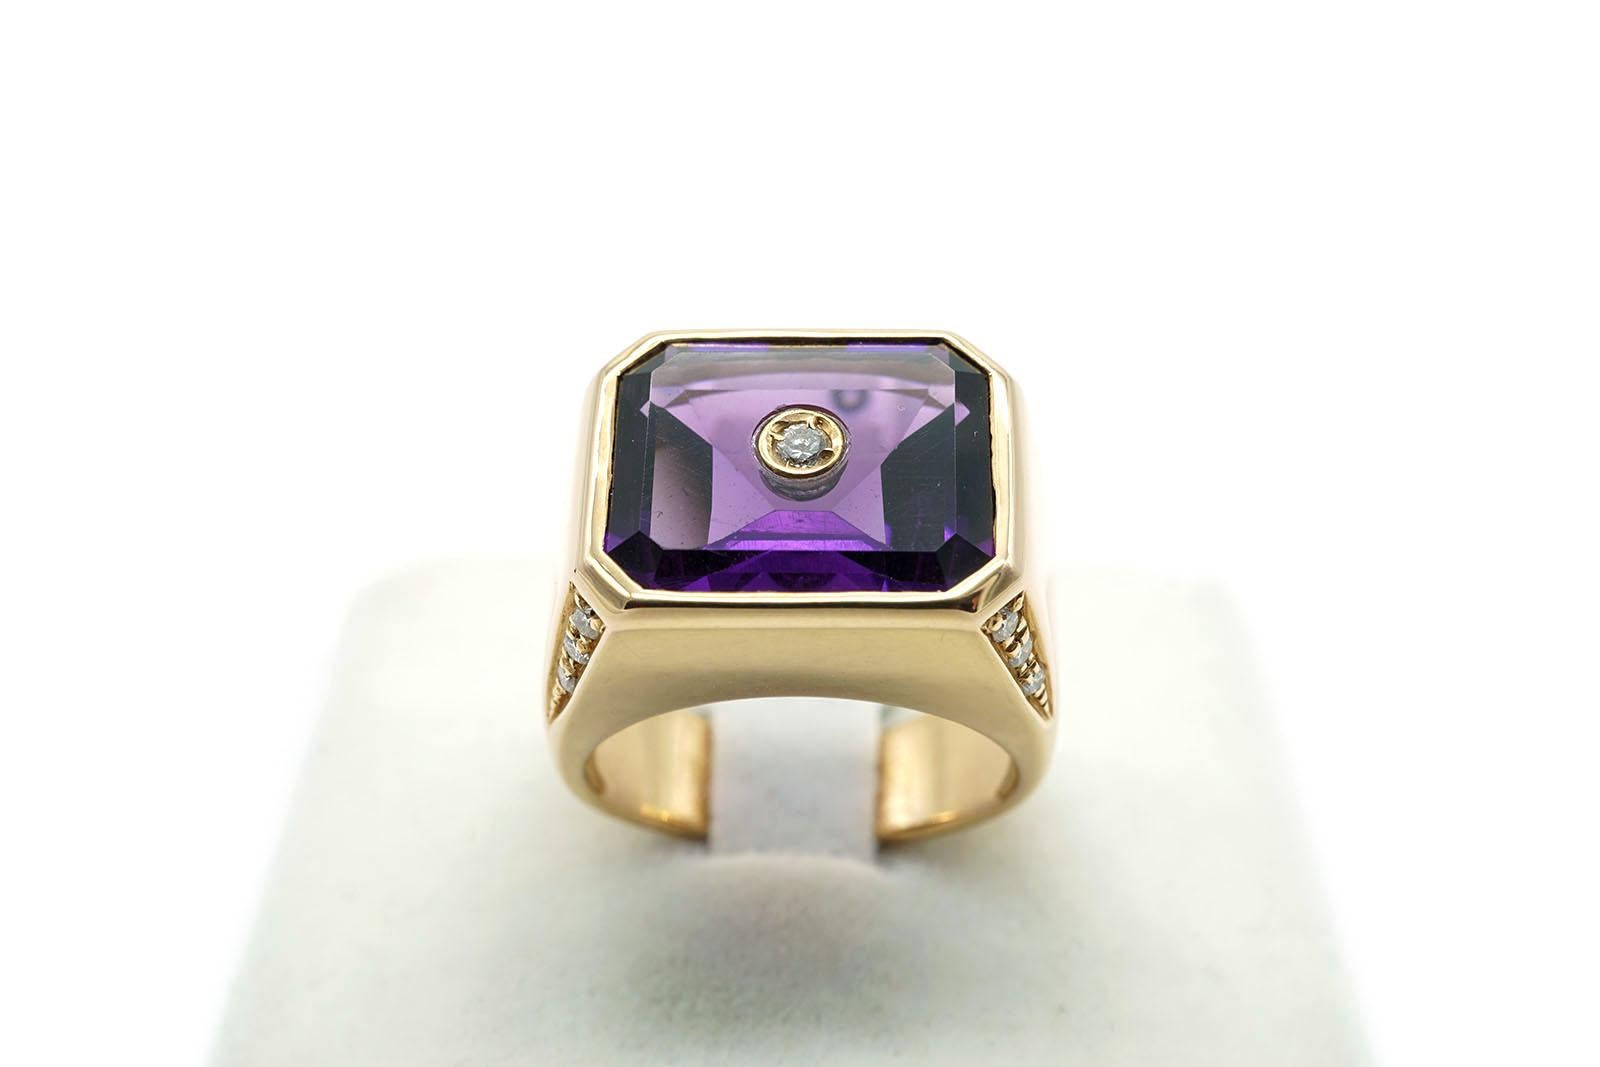 Chevalier ring in 18 Kt  pink gold. the ring weighs gr 13.70.
it has an octagonal Amethyst which size cm 1.10 x 1.30.
The ring has Diamonds in the four corners and one Diamond set in the Amethyst centre.
Diamonds weigh is ct 0.20.
The size of the